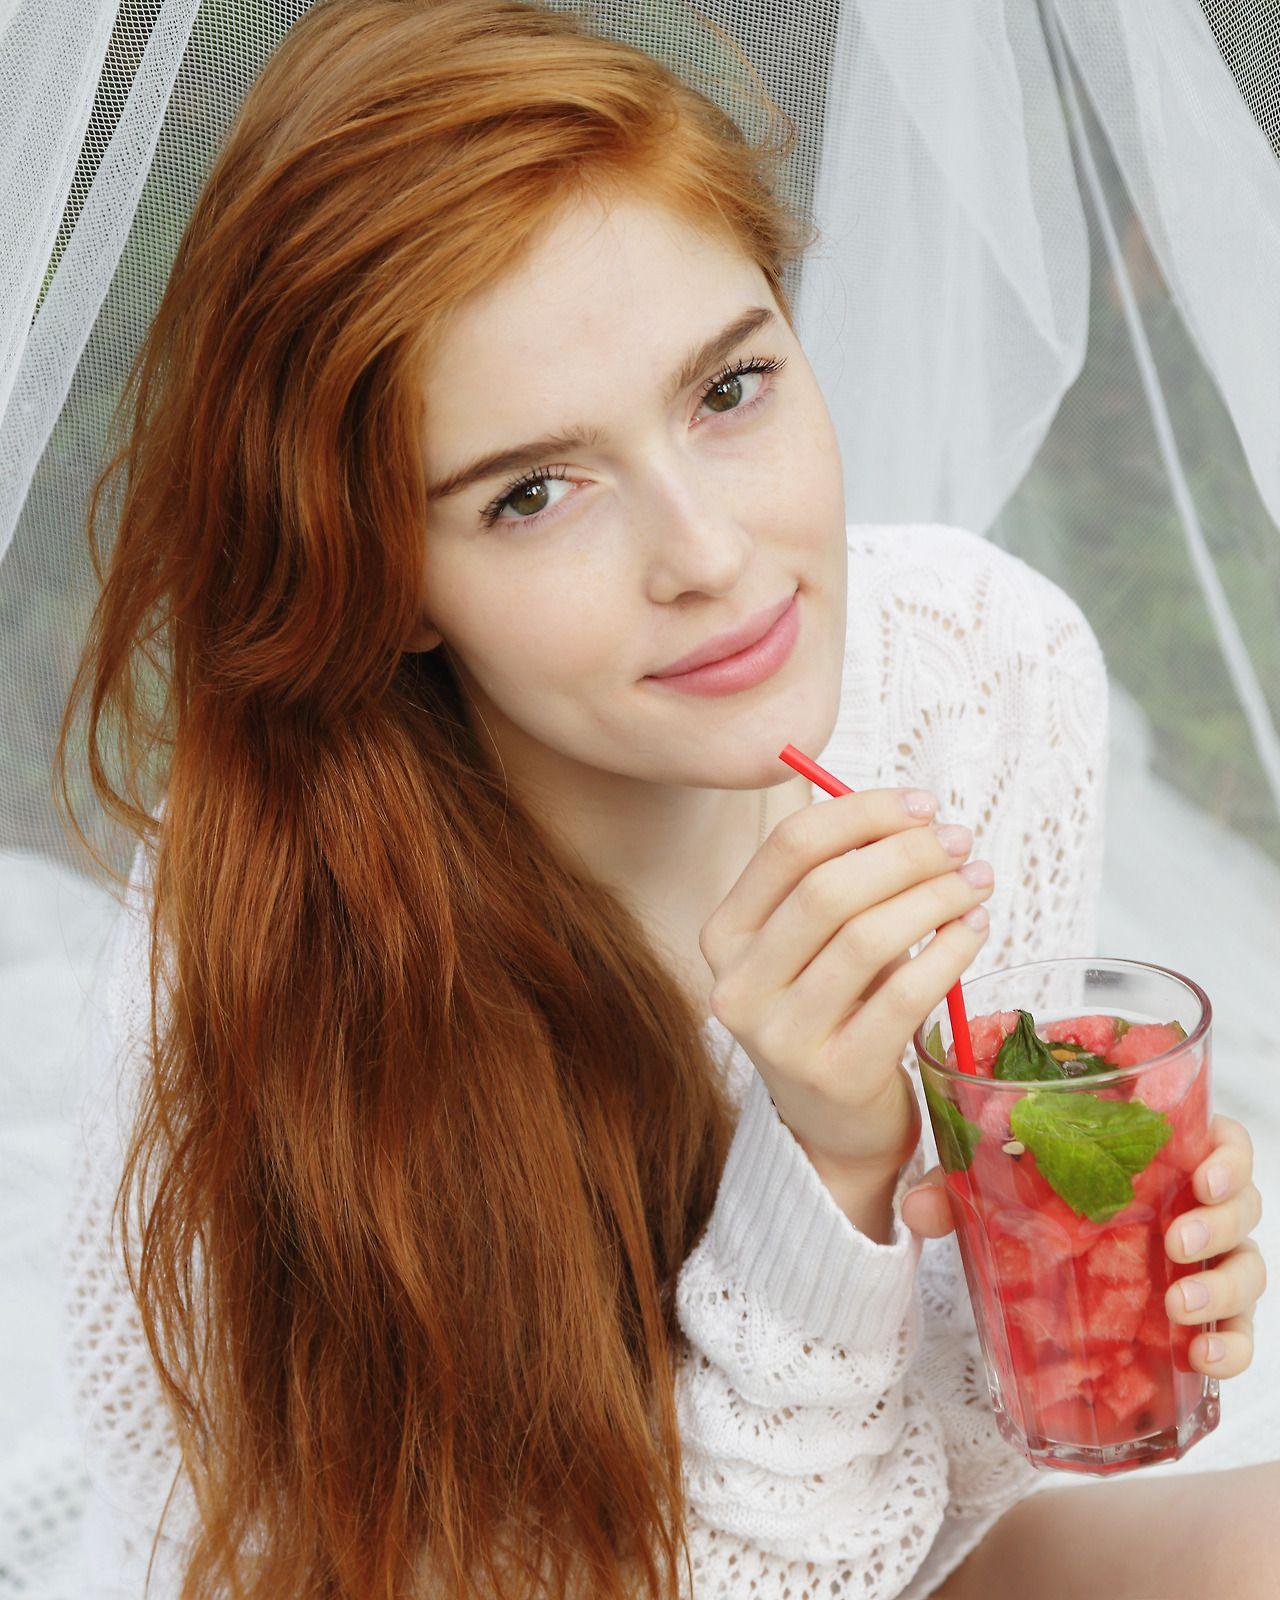 Jia Lissa. Ginger snaps. Pale redhead, Beautiful